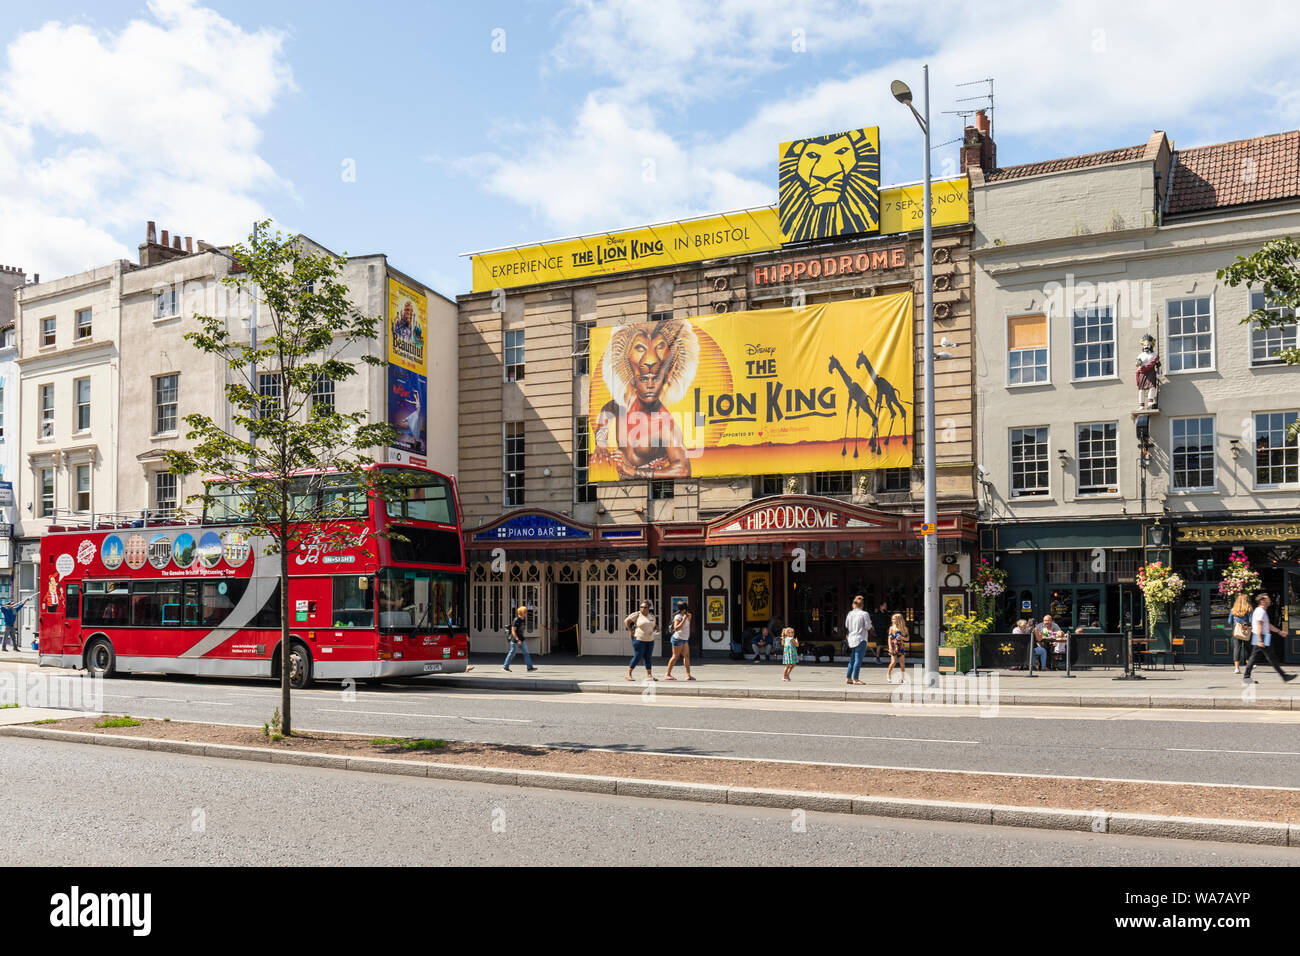 Bristol Hippodrome Theatre advertising Disney The Lion King with a Bristol Insight red open top bus outside, St Augustine's Parade, City of Bristol UK Stock Photo